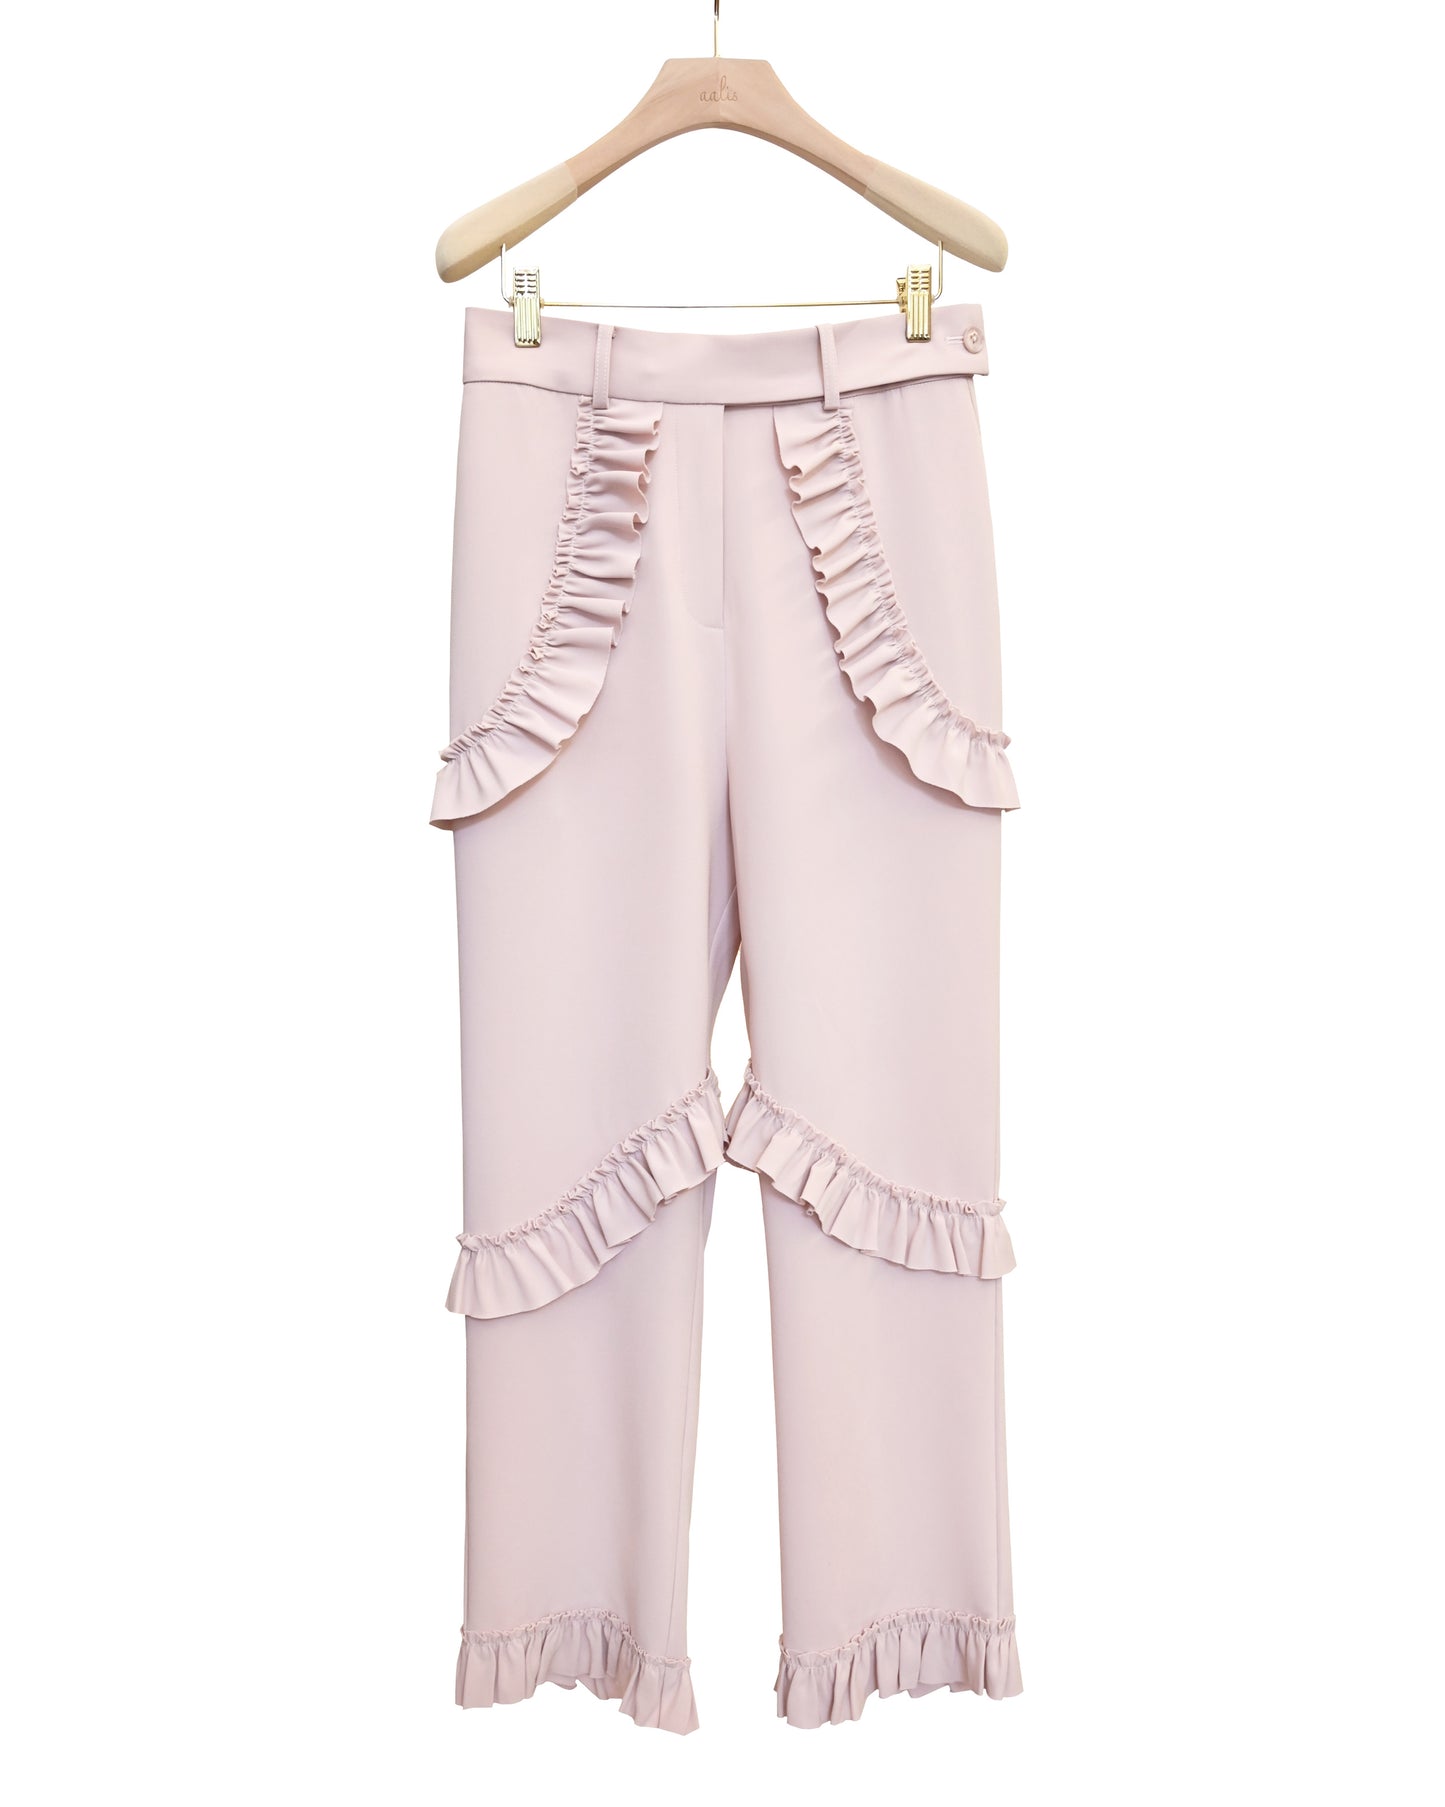 aalis DONIS ruffle detail suiting pants (Light pink)